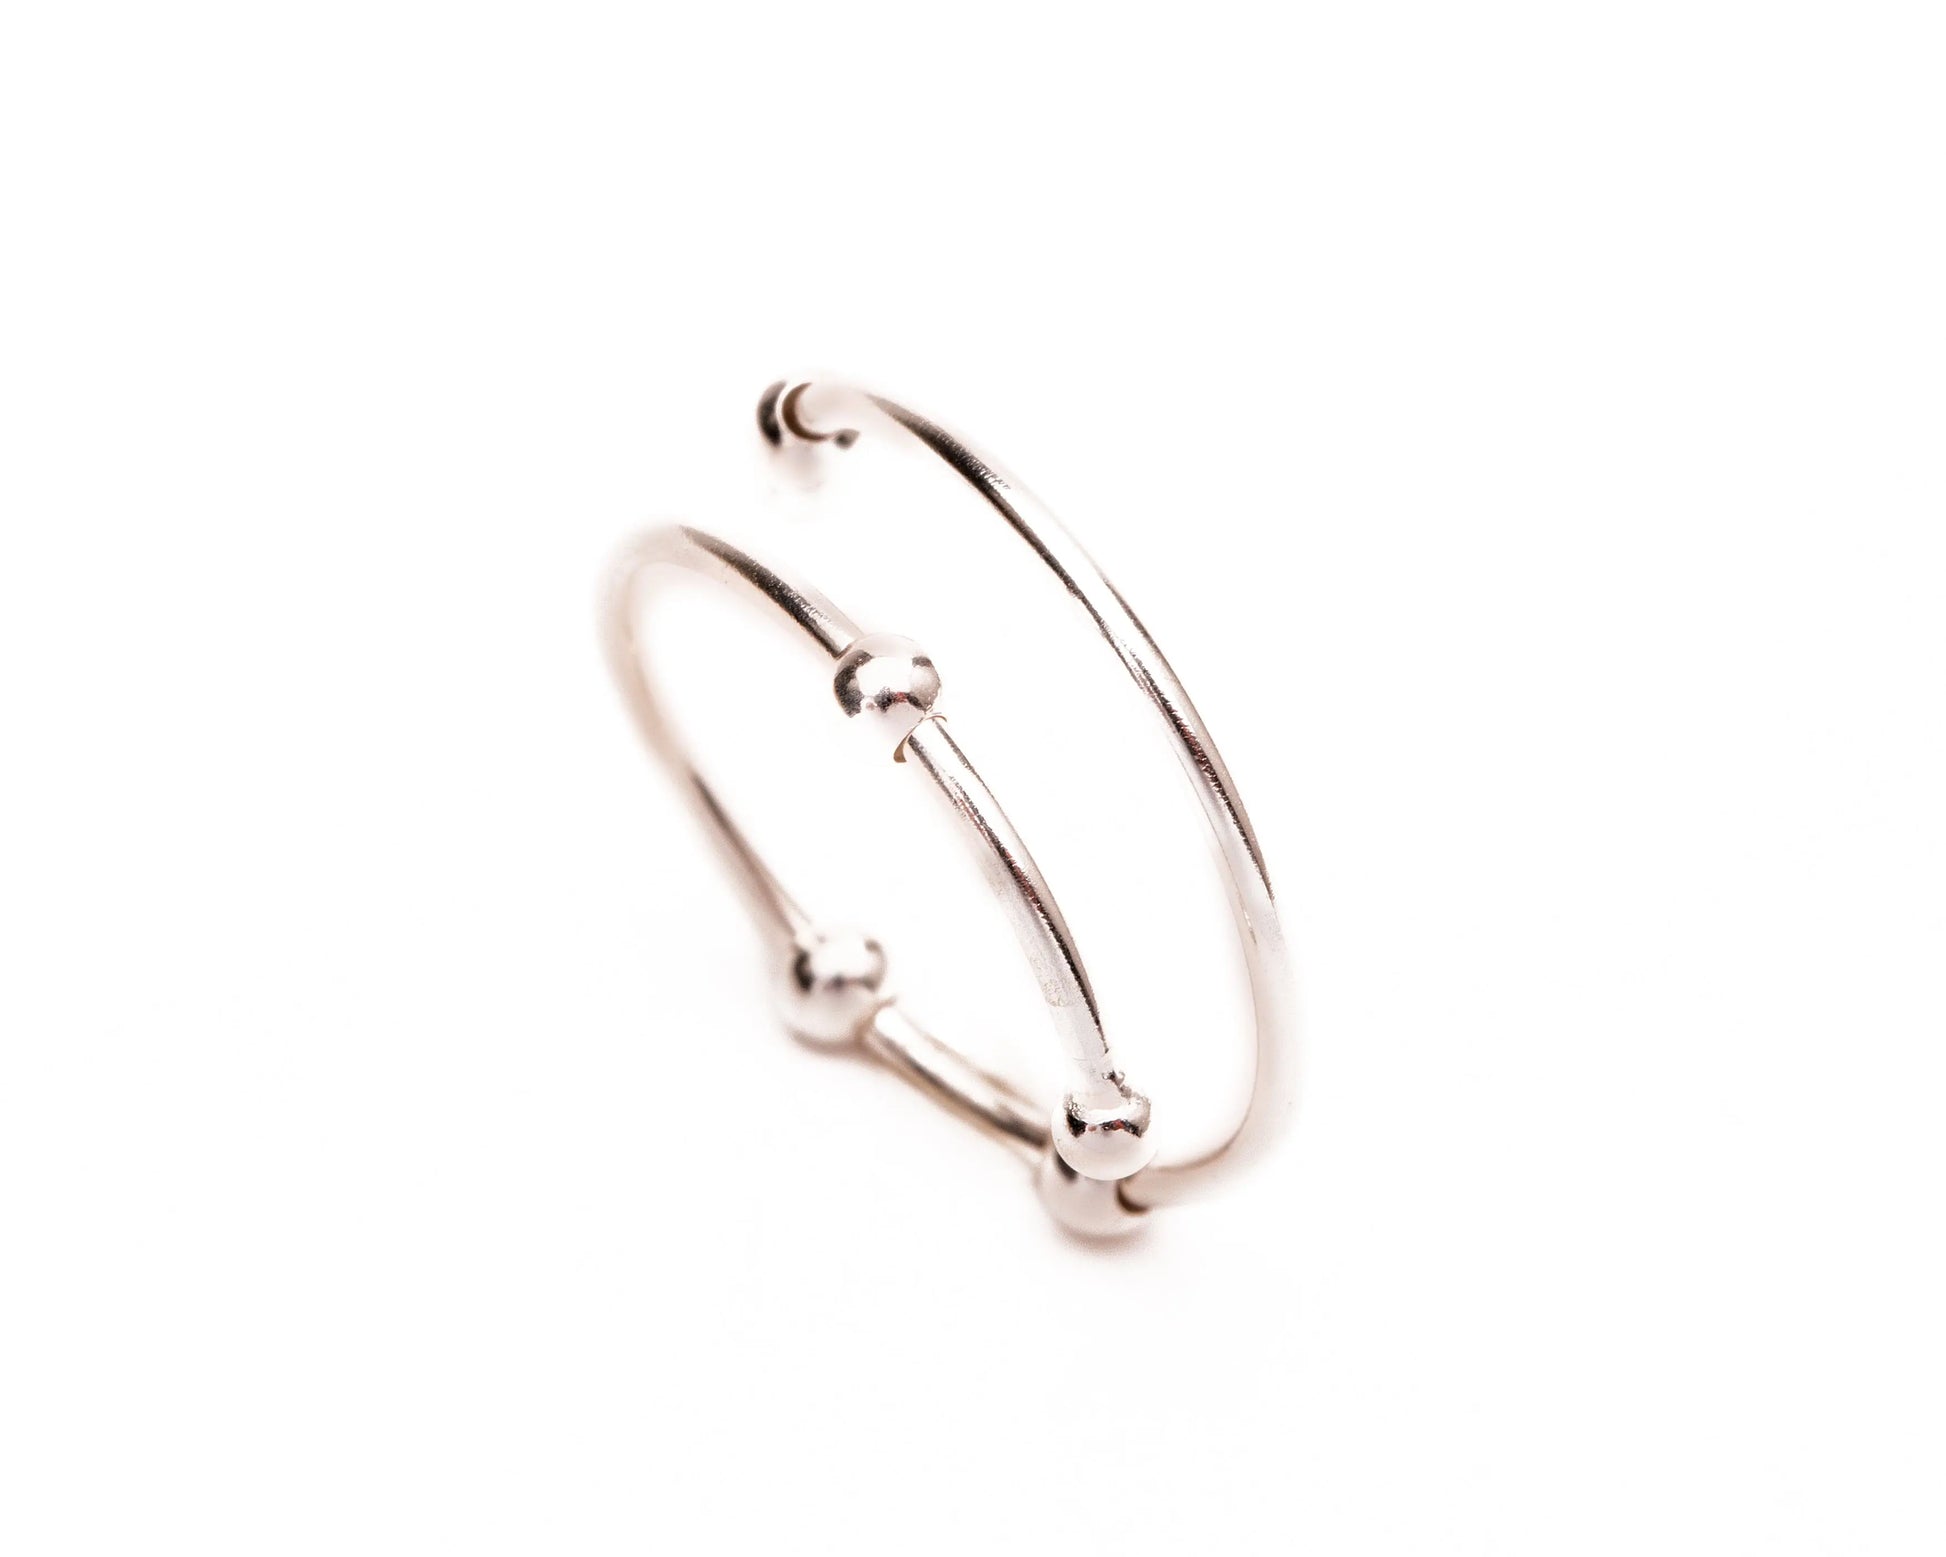 The Spiral Serenity Ring Night Arrow